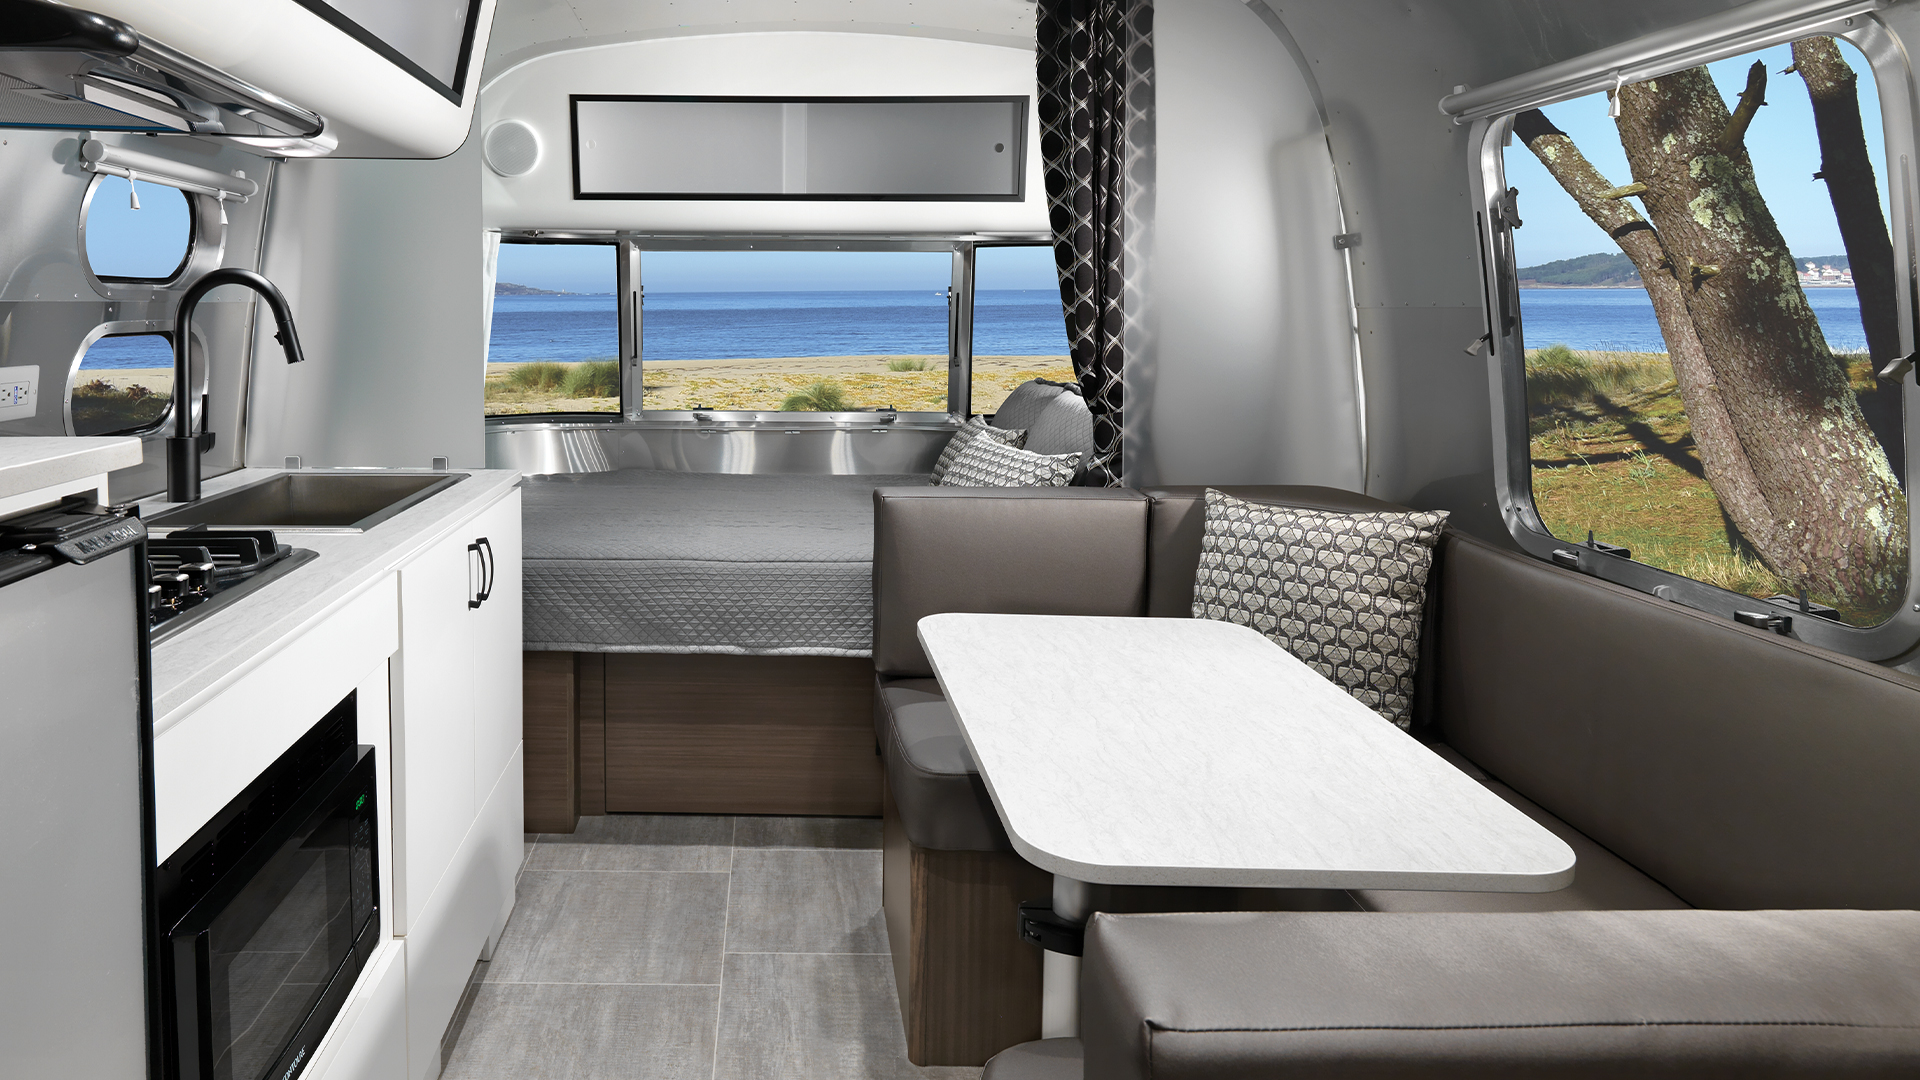 A panoramic view out of the windows of an Airstream Caravel travel trailer.